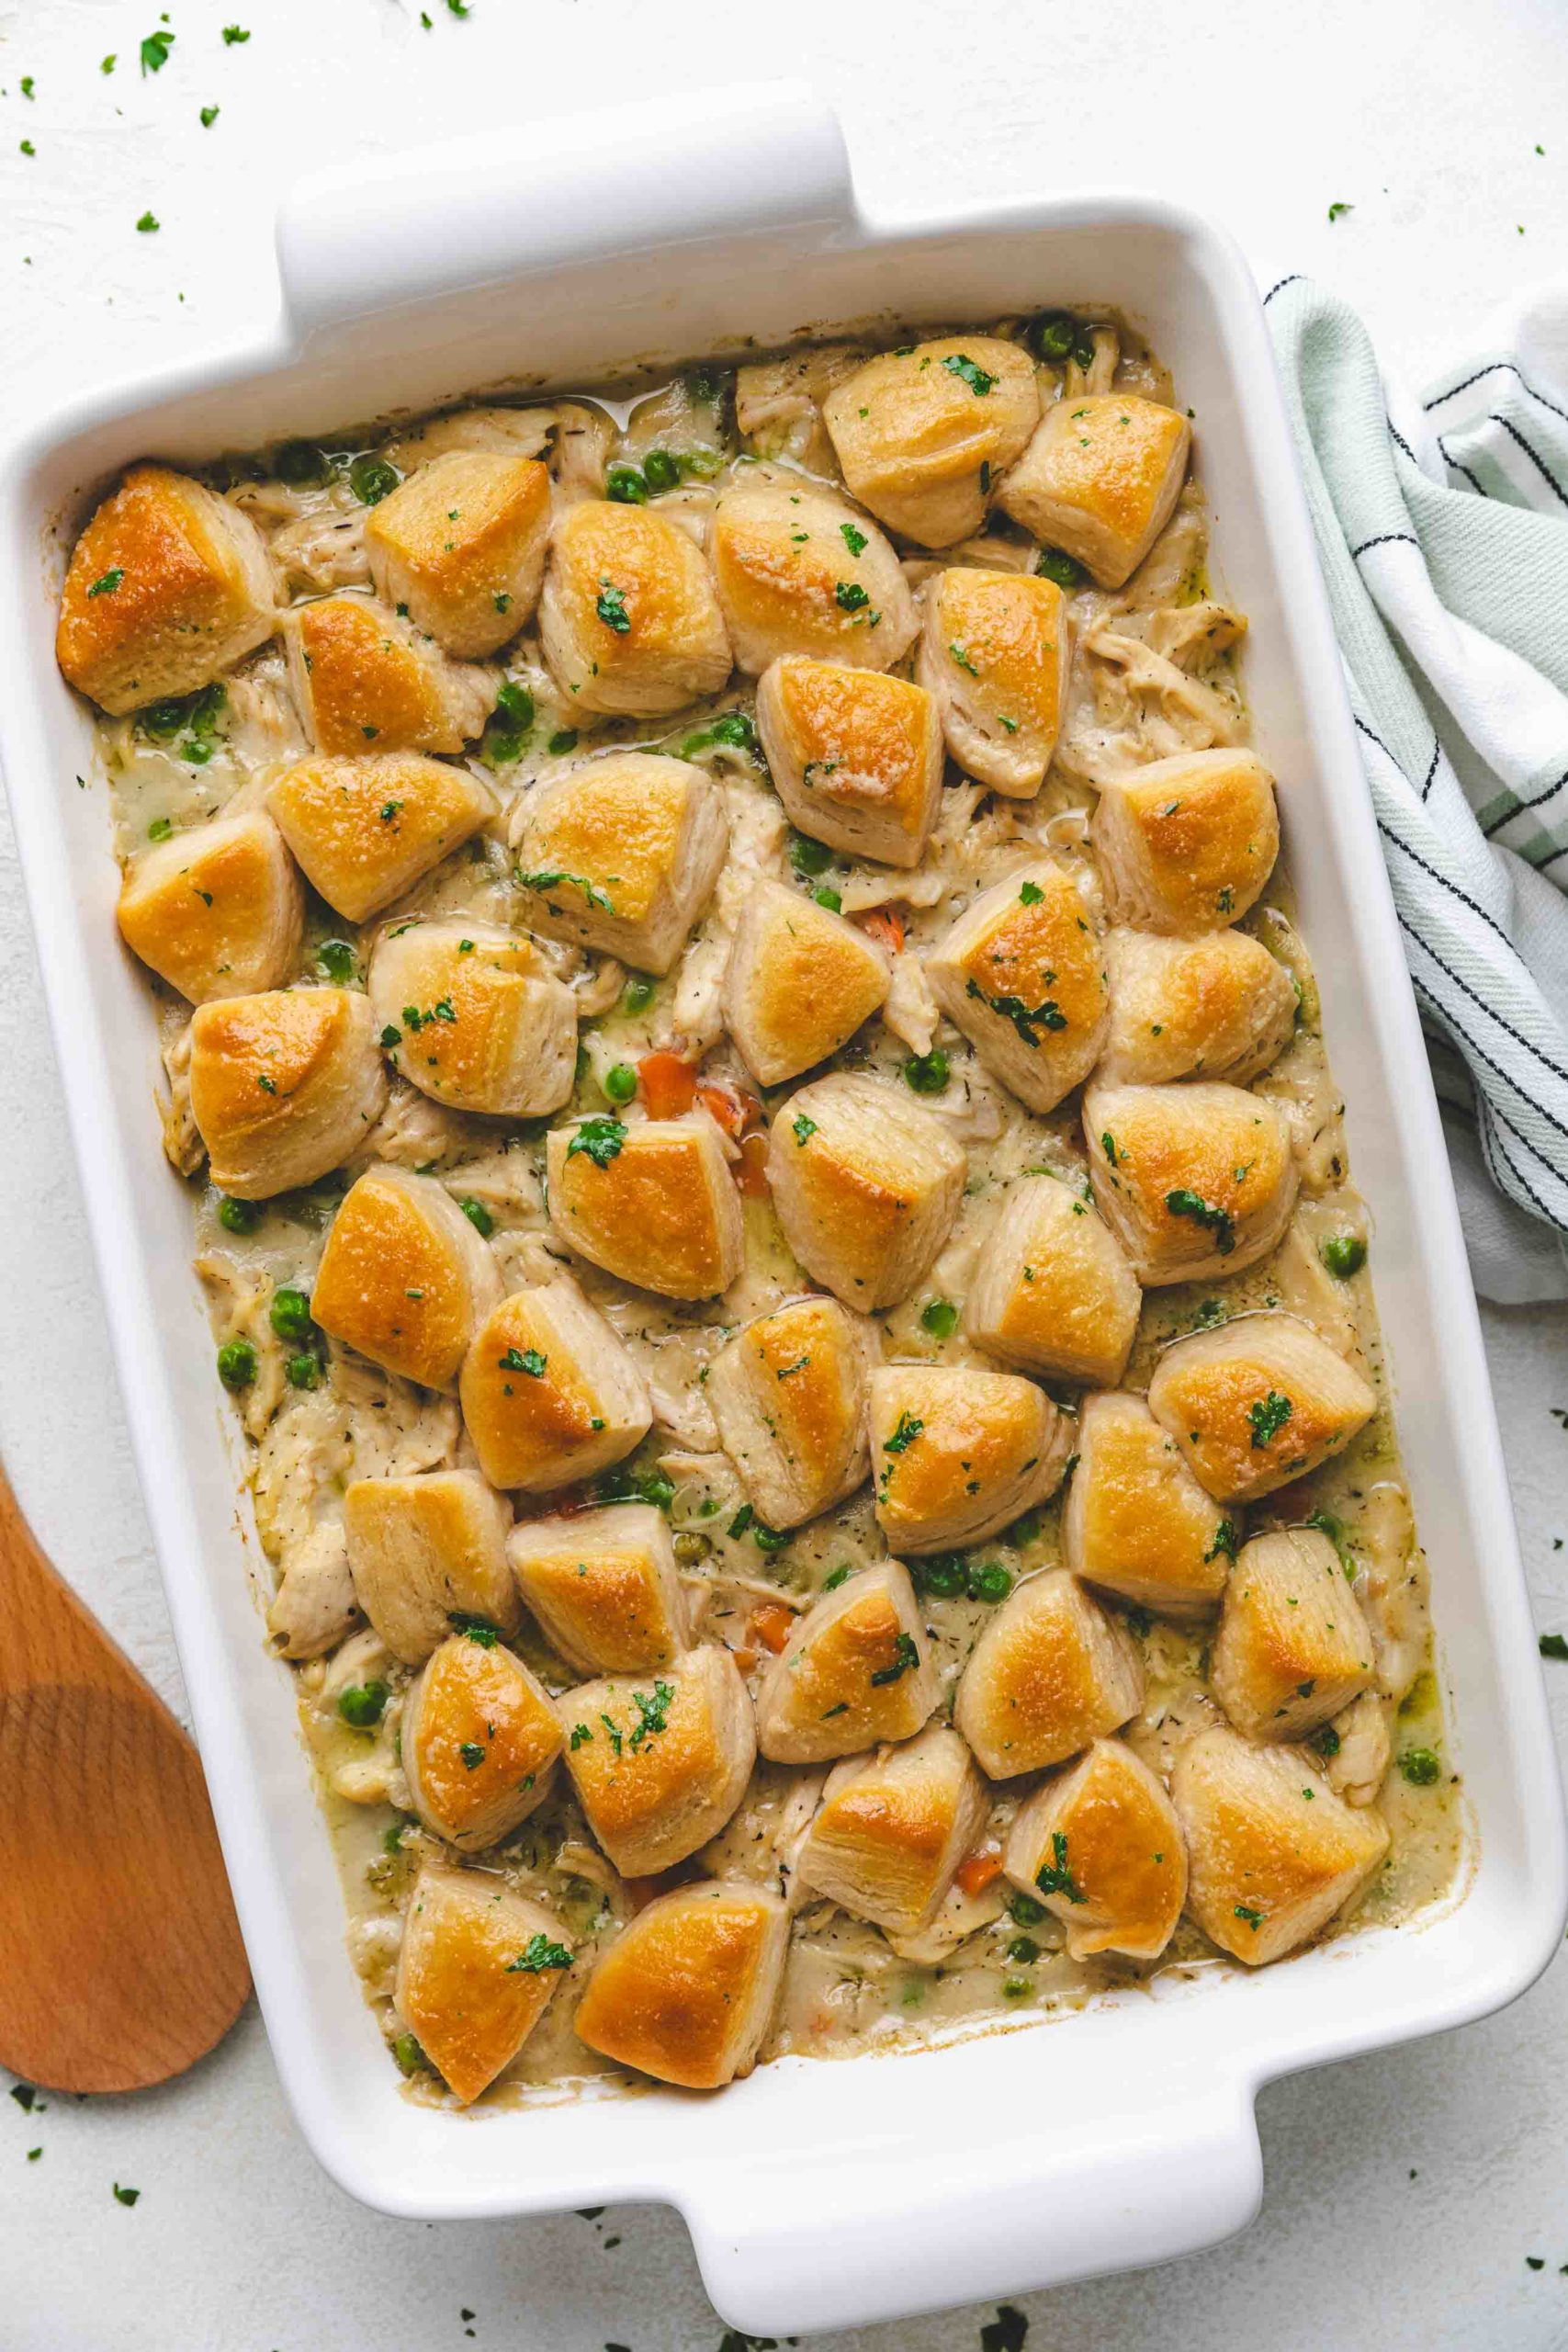 Top down view of chicken casserole with garlic butter biscuits.